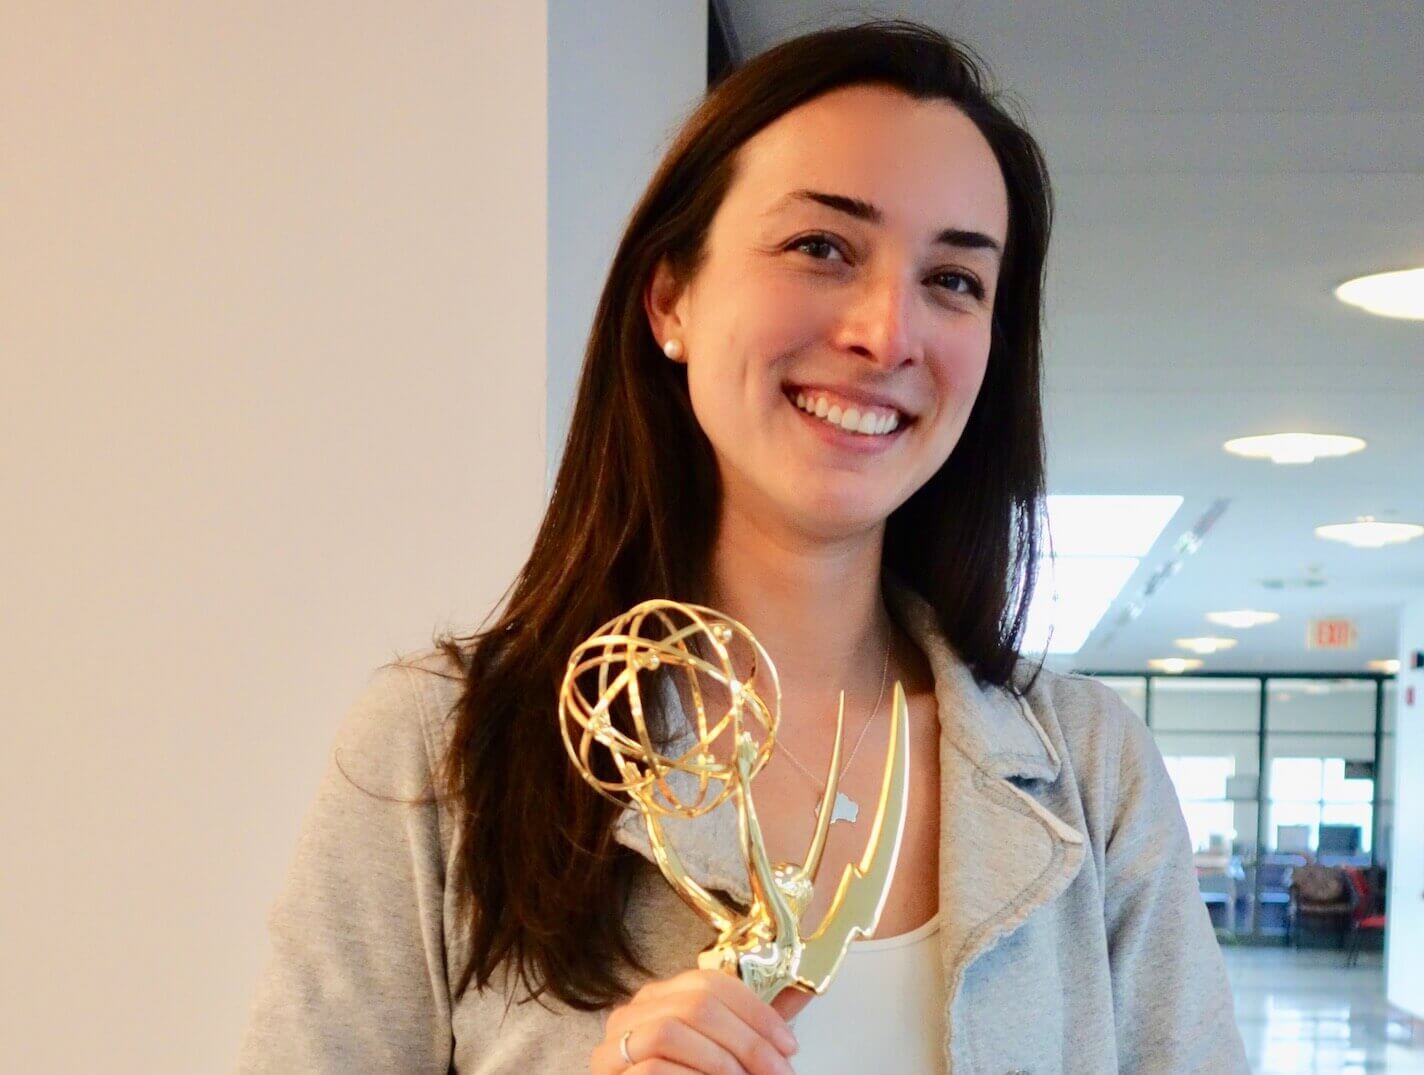 Katharine Gibson '13, shown in this shot with her Emmy statuette, studied TV and Radio here at Monmouth.